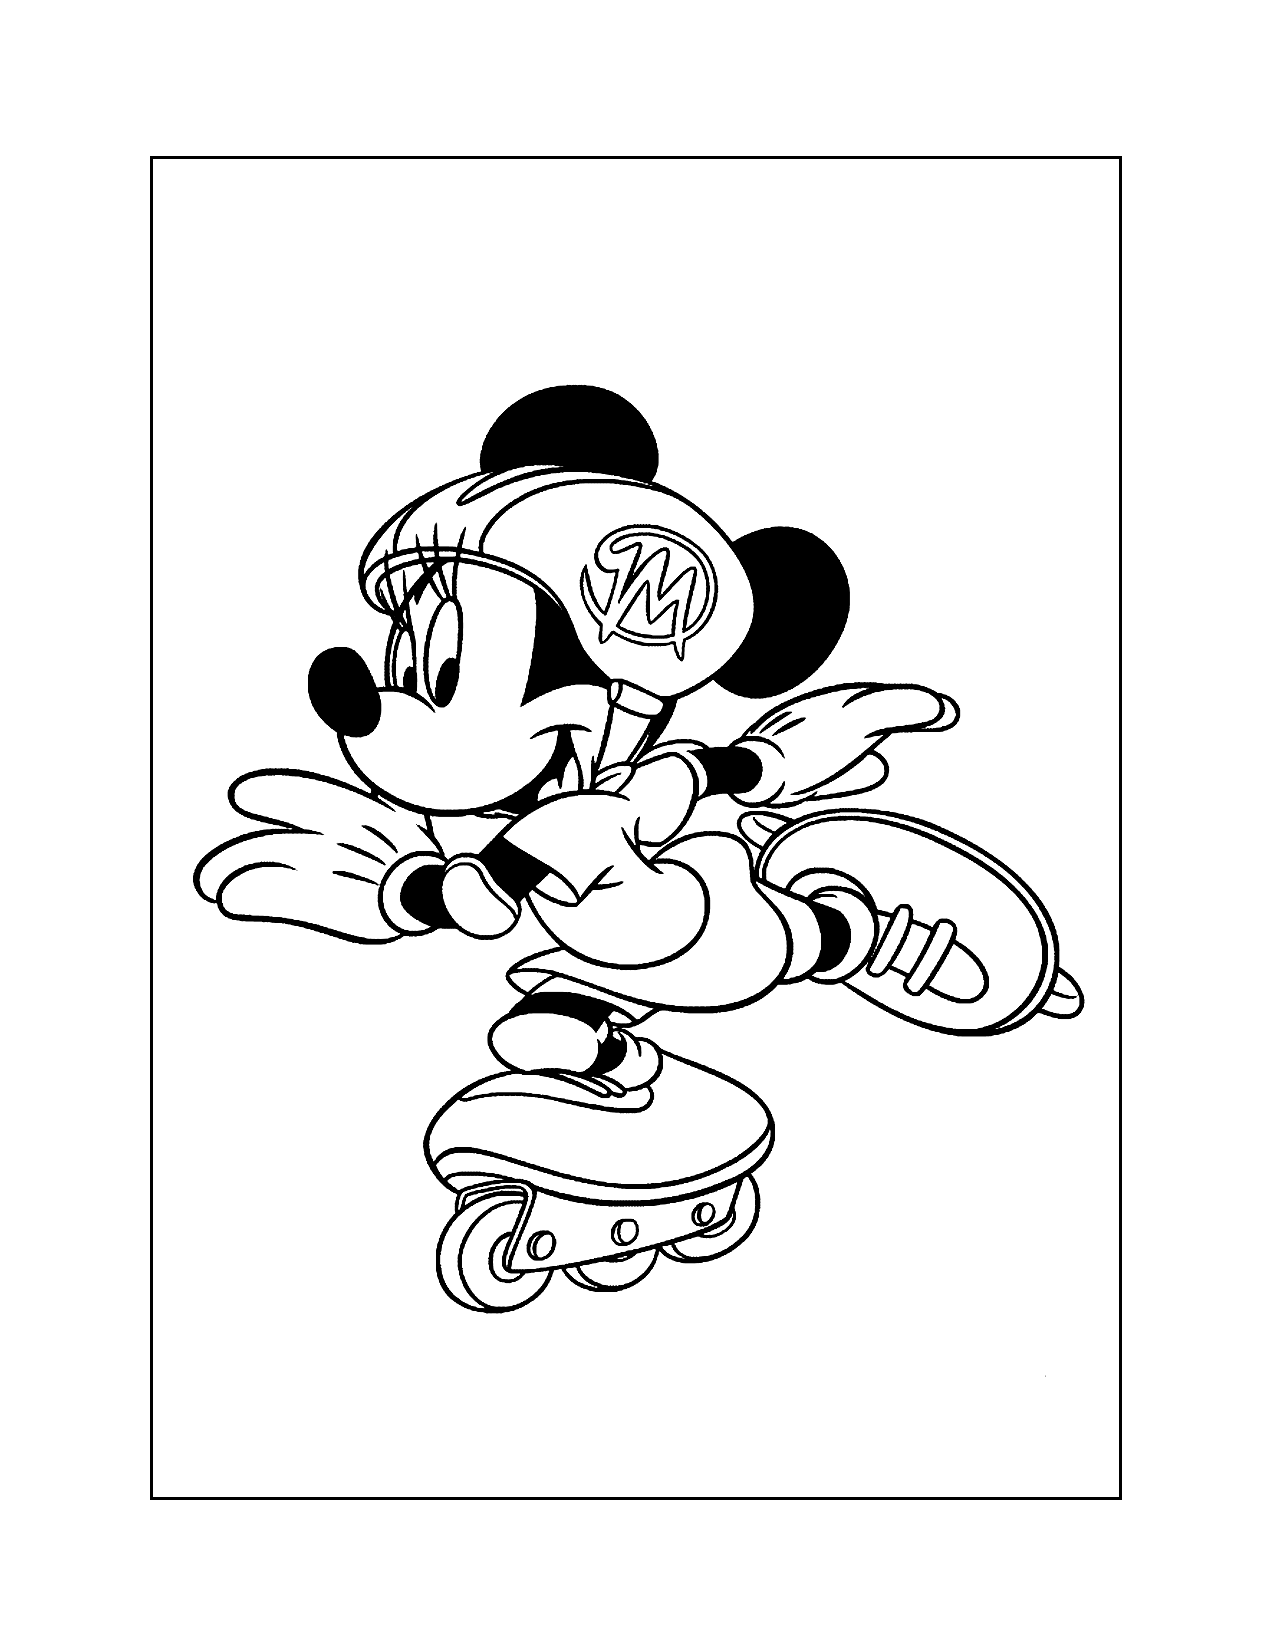 Minnie Mouse Roller Blading Coloring Page